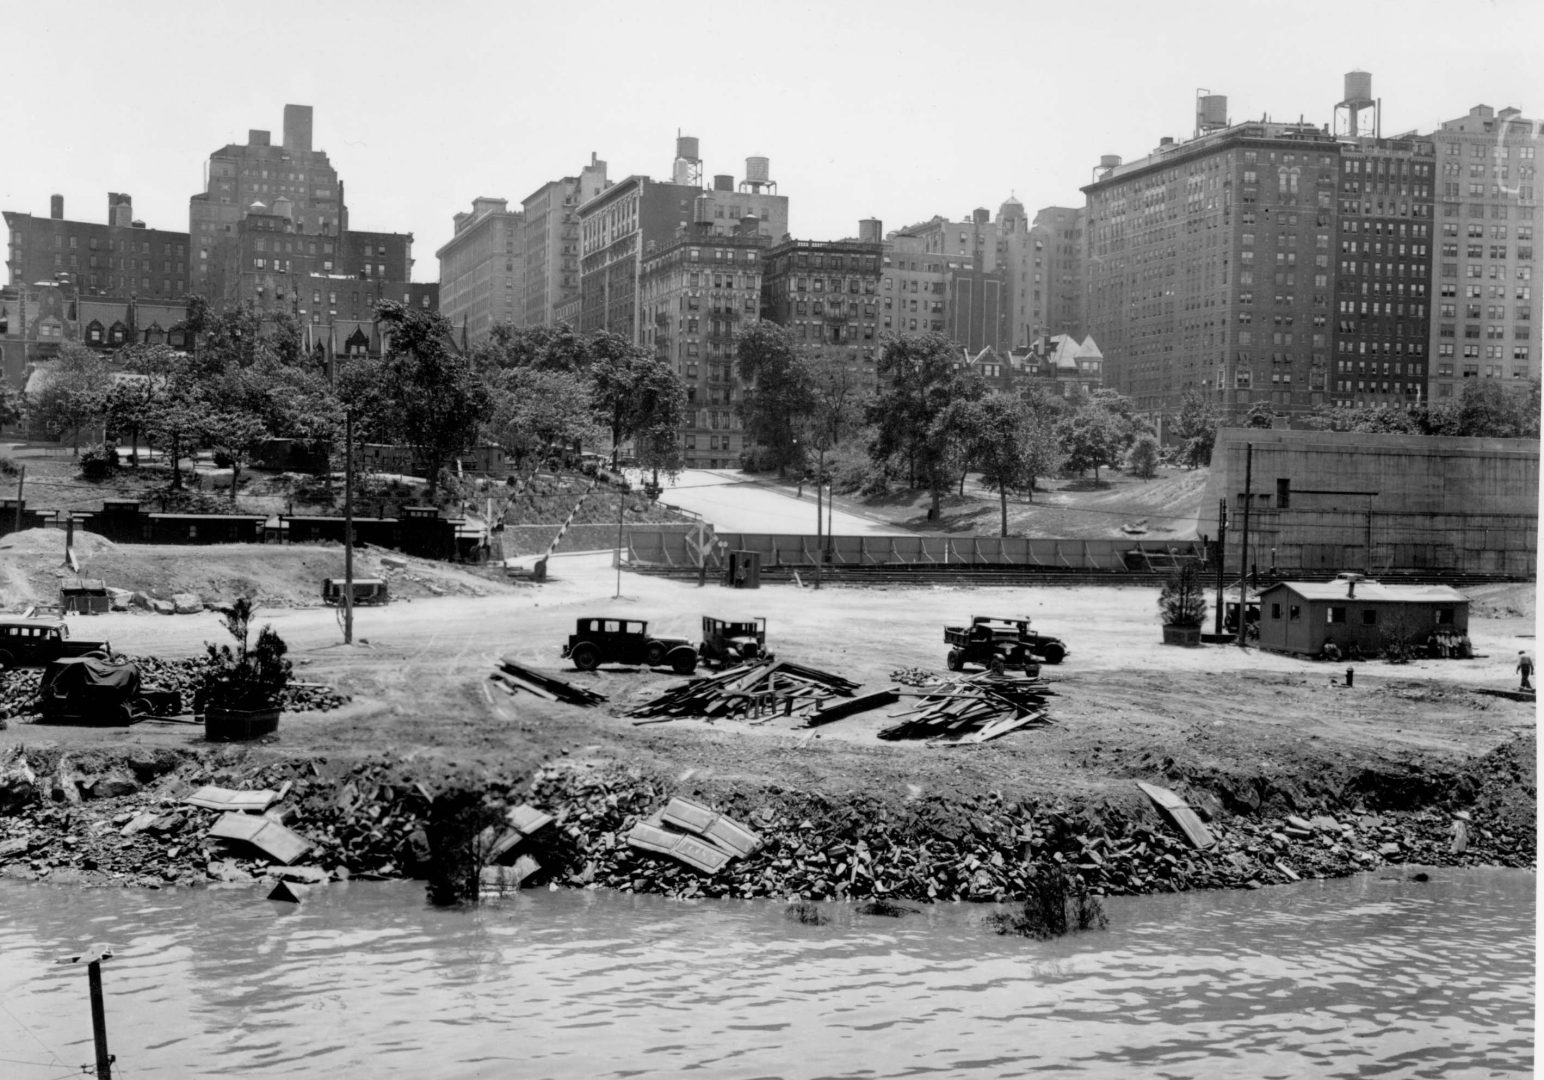 Old fashioned cars parked at a jagged shoreline at 79th Street on the west side